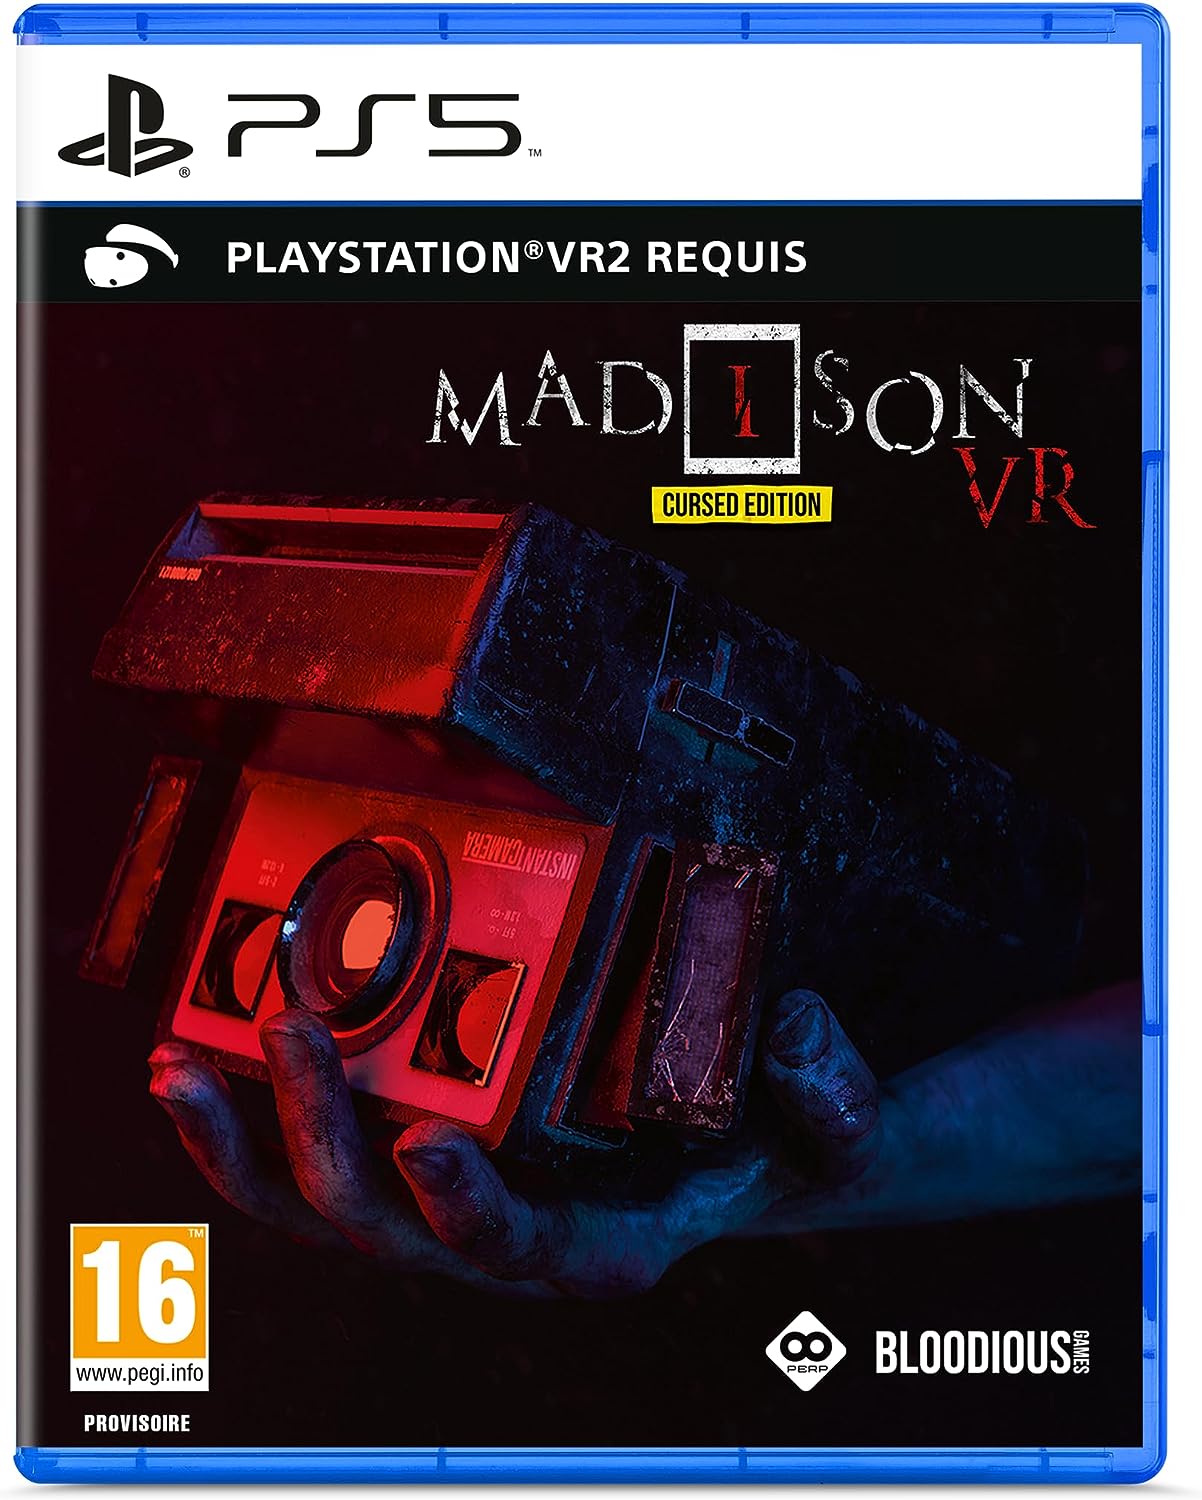 EAN : 5061005780811 - Madison VR Cursed Edition | PS VR2 - PS5